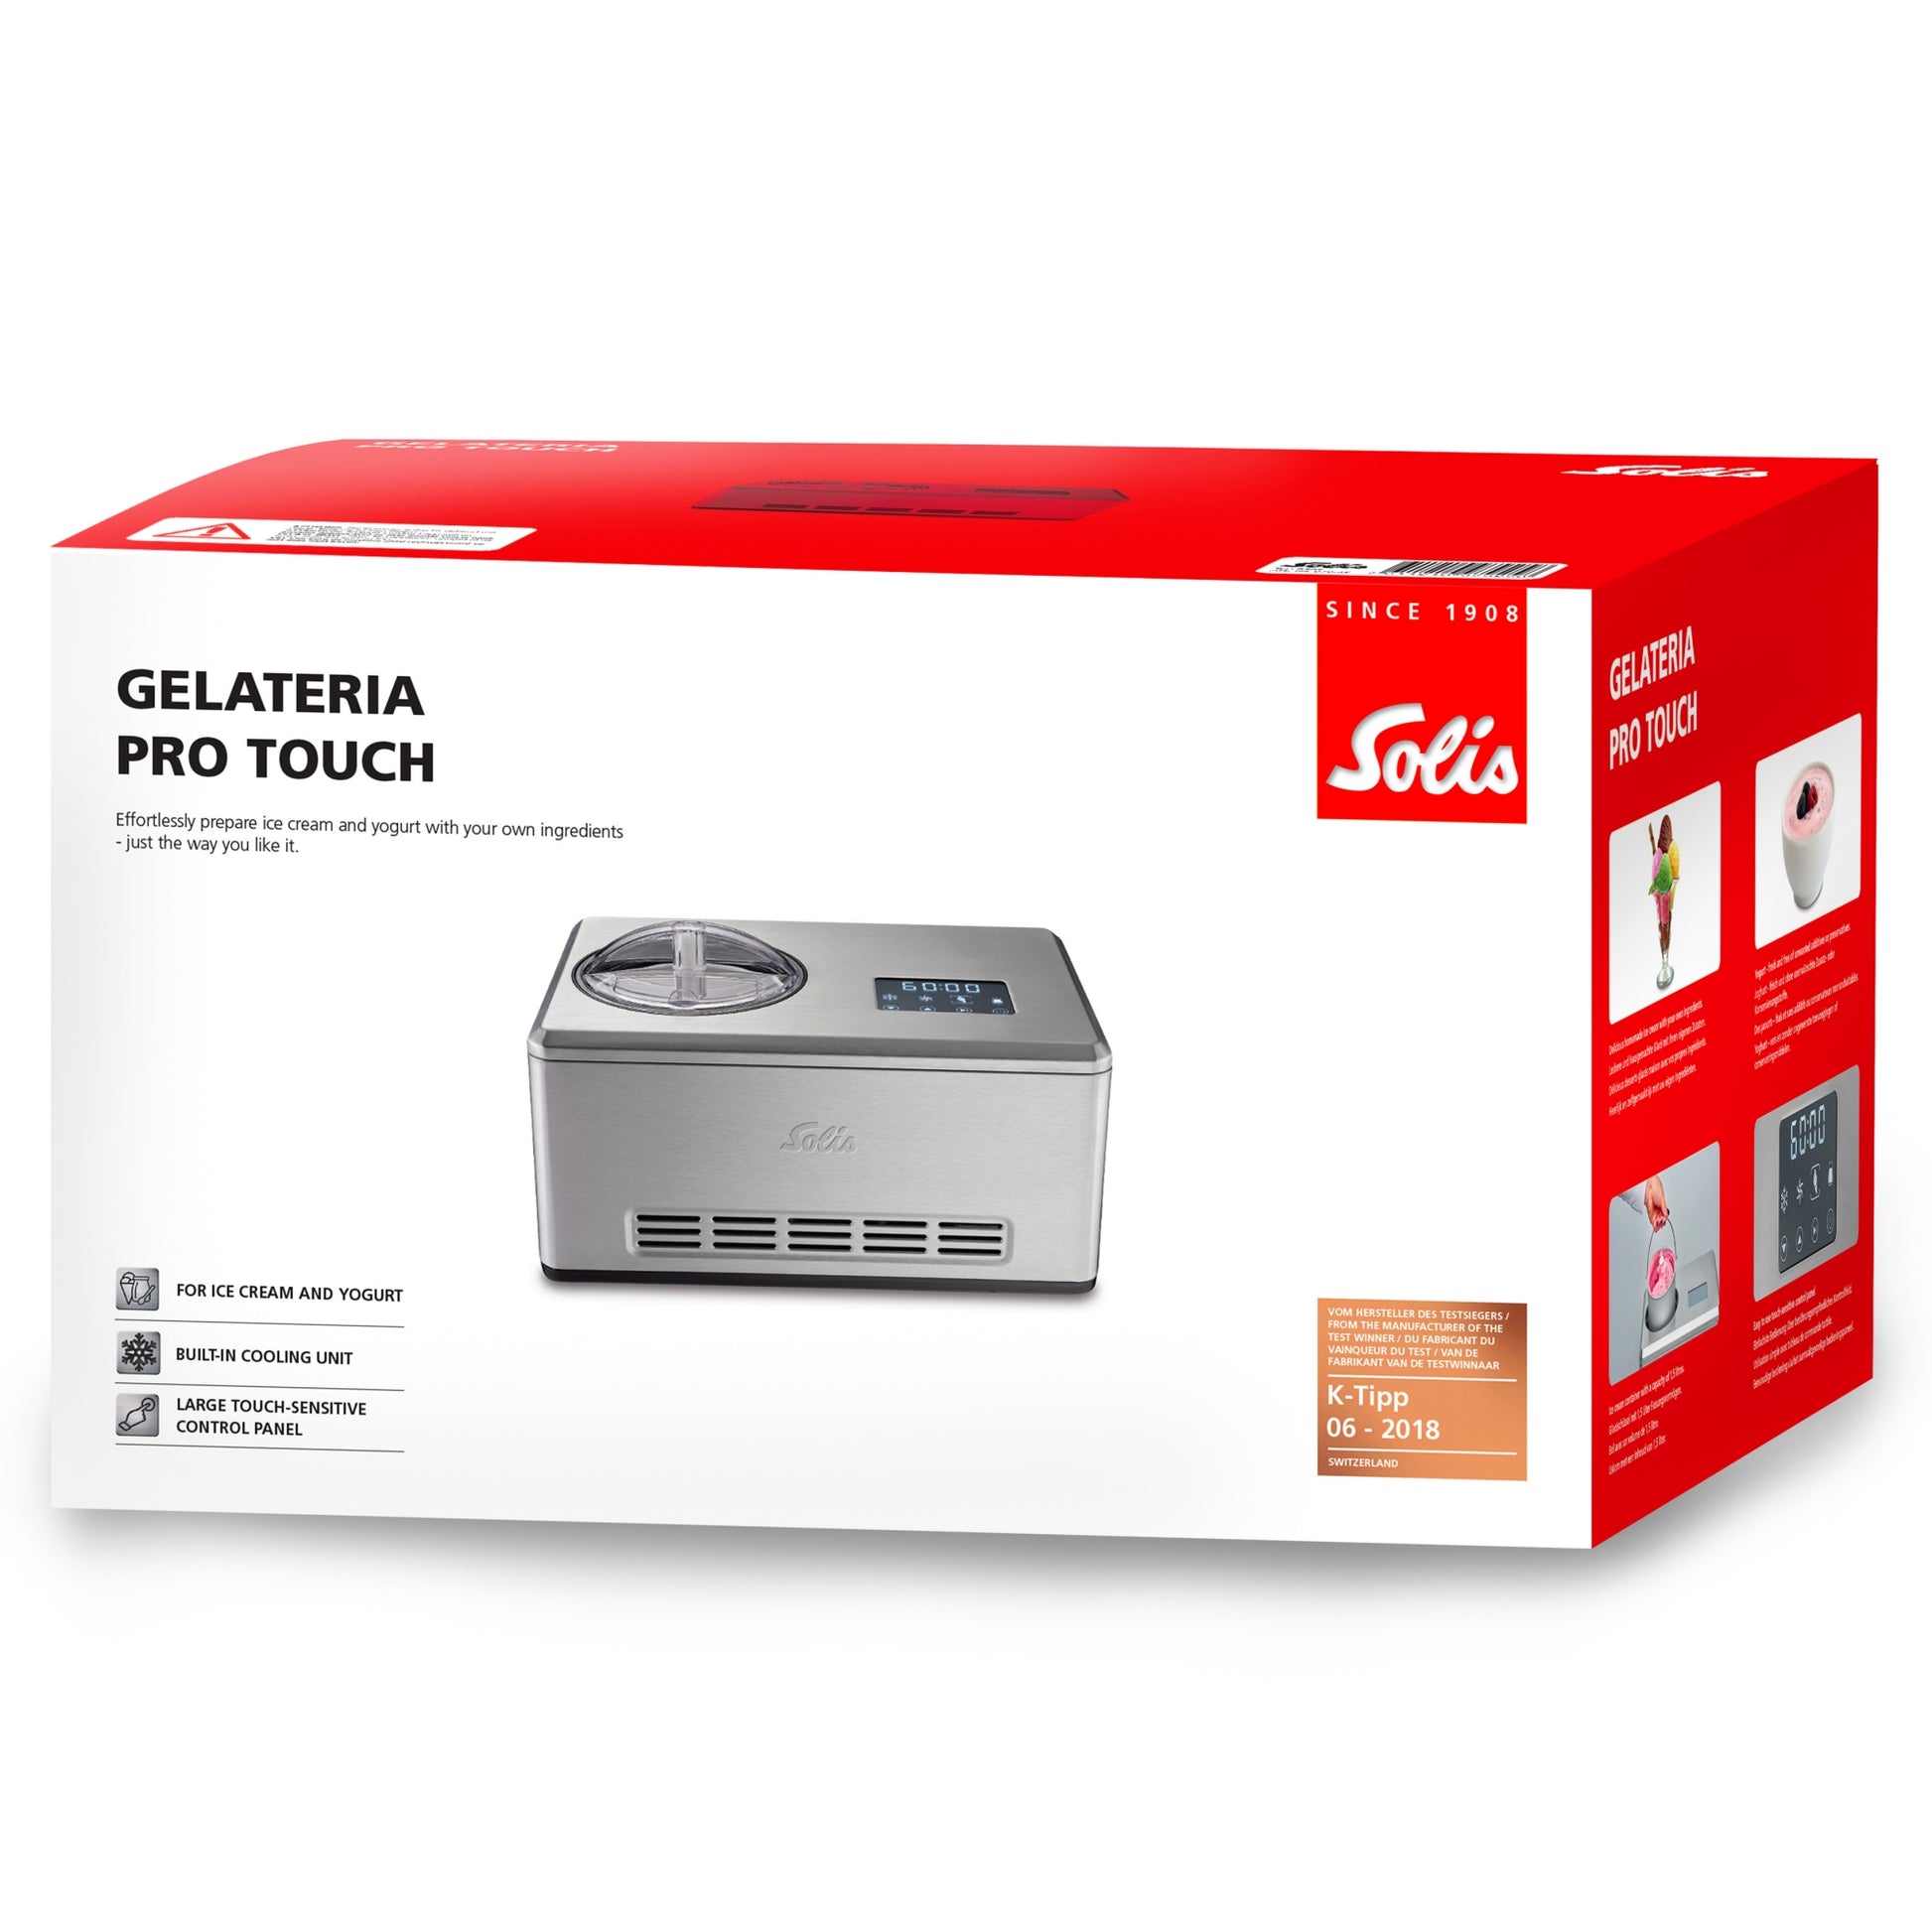 Gelateria Pro Touch (Typ 8502)